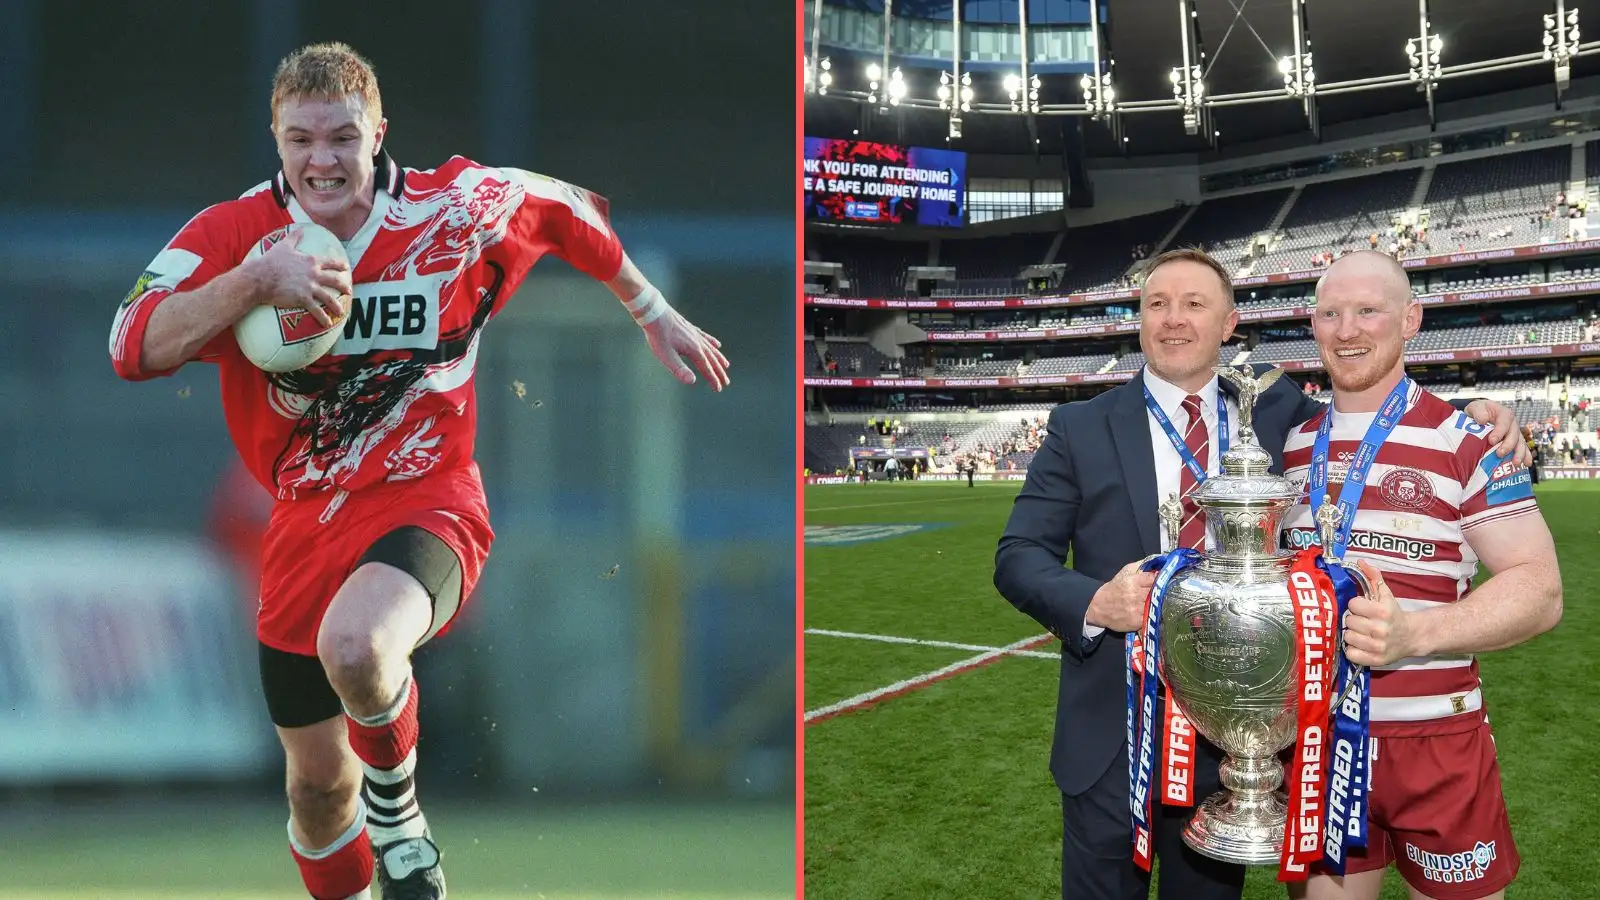 Wigan CEO Kris Radlinski shares emotional family journey and St Helens rivalry ahead of Good Friday